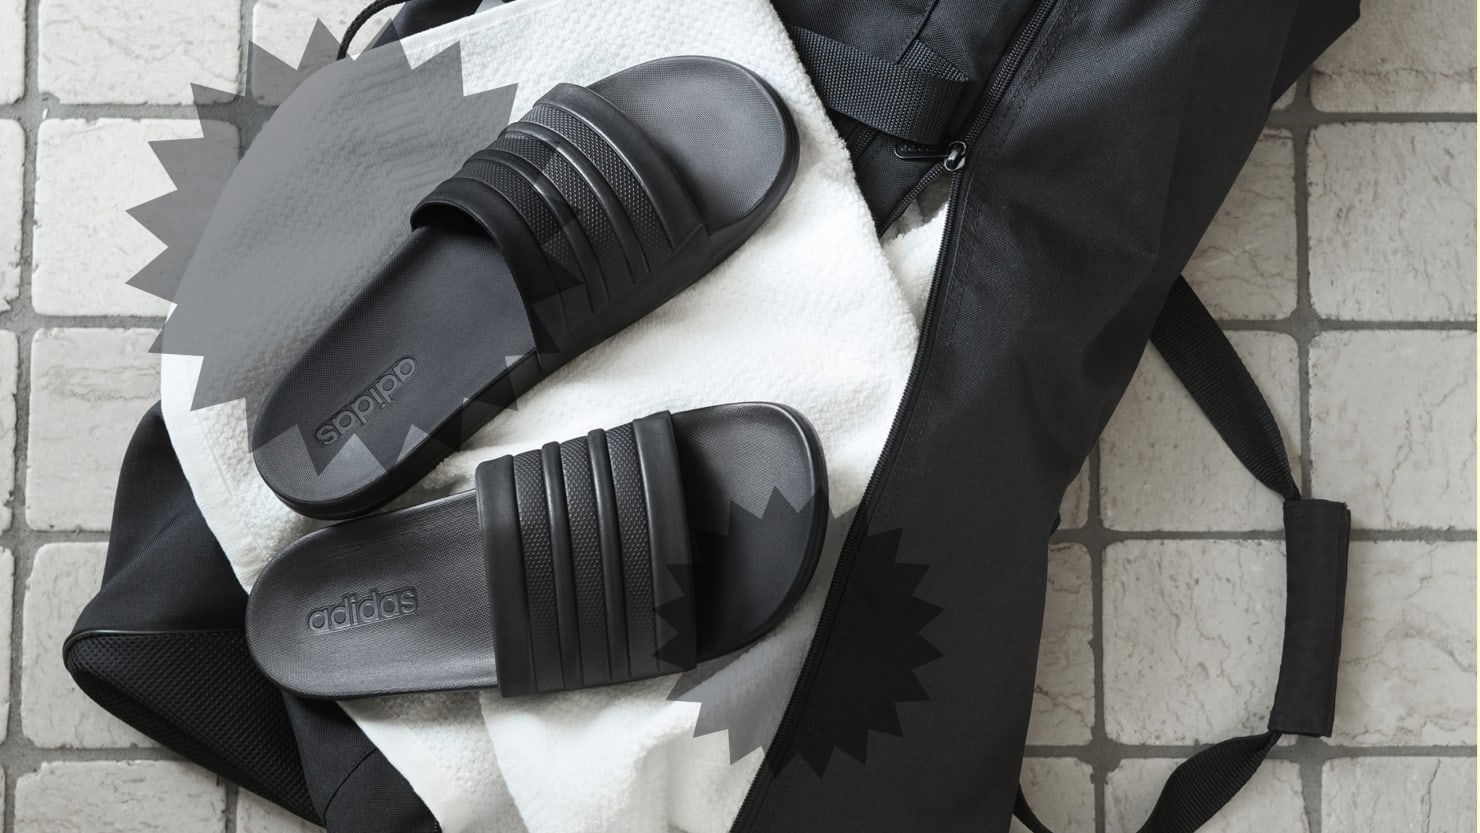 These Adidas Slides Are The Most 